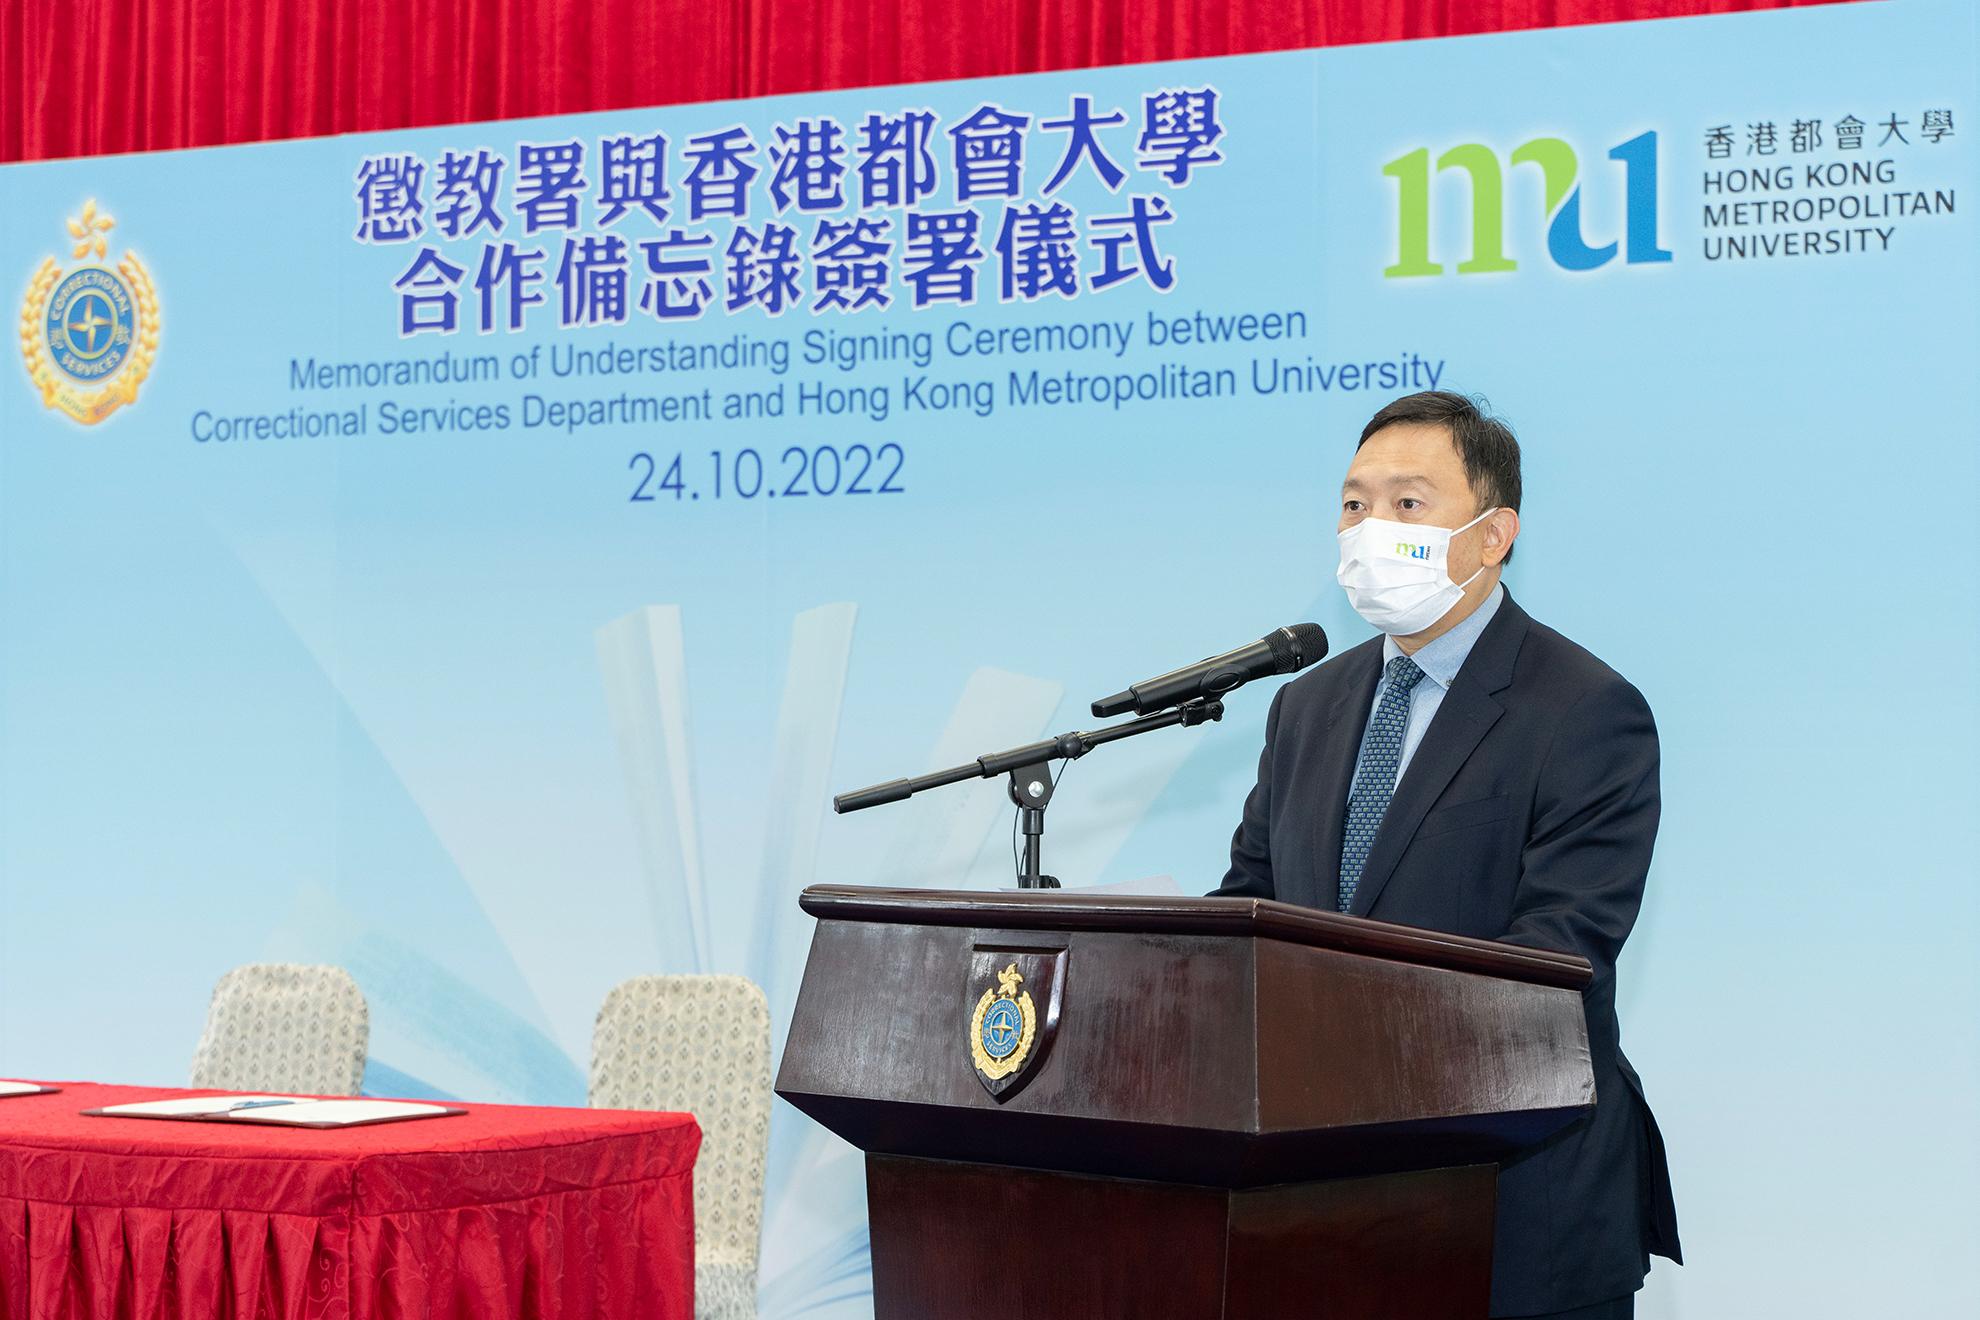 The Correctional Services Department and the Hong Kong Metropolitan University (HKMU) today (October 24) signed a Memorandum of Understanding to strengthen learning support for persons in custody. Photo shows the Council Chairman of the HKMU, Dr Conrad Wong, delivering a speech at the signing ceremony.